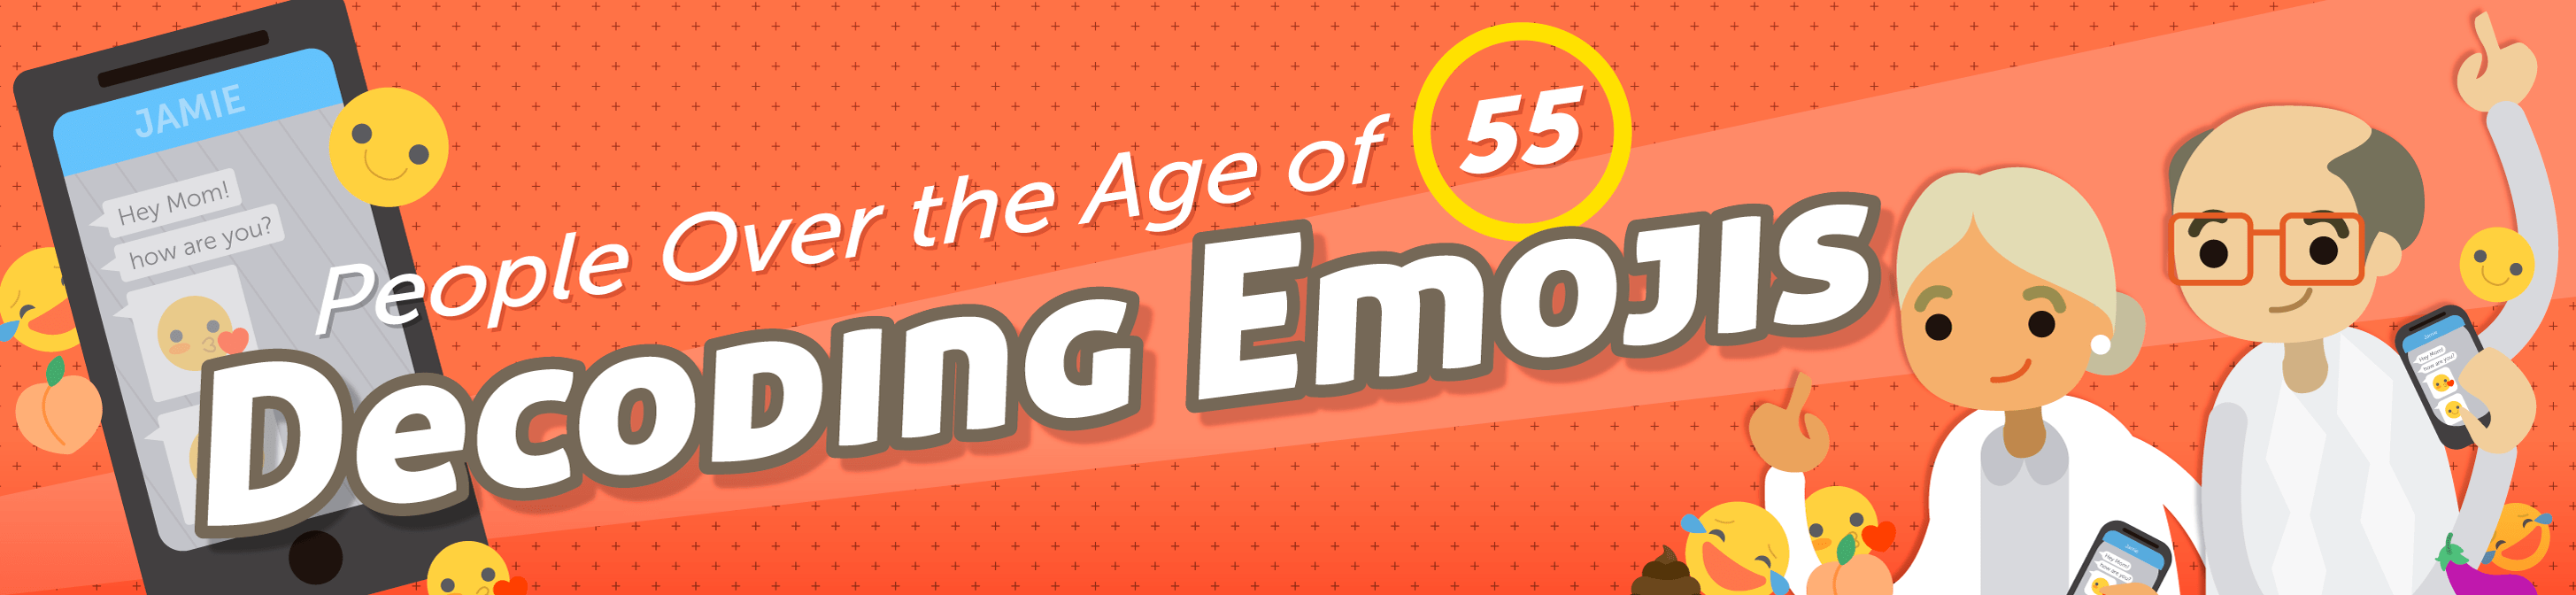 Interpreting Emojis - Do you know what the eggplant emoji means? Neither do these people.